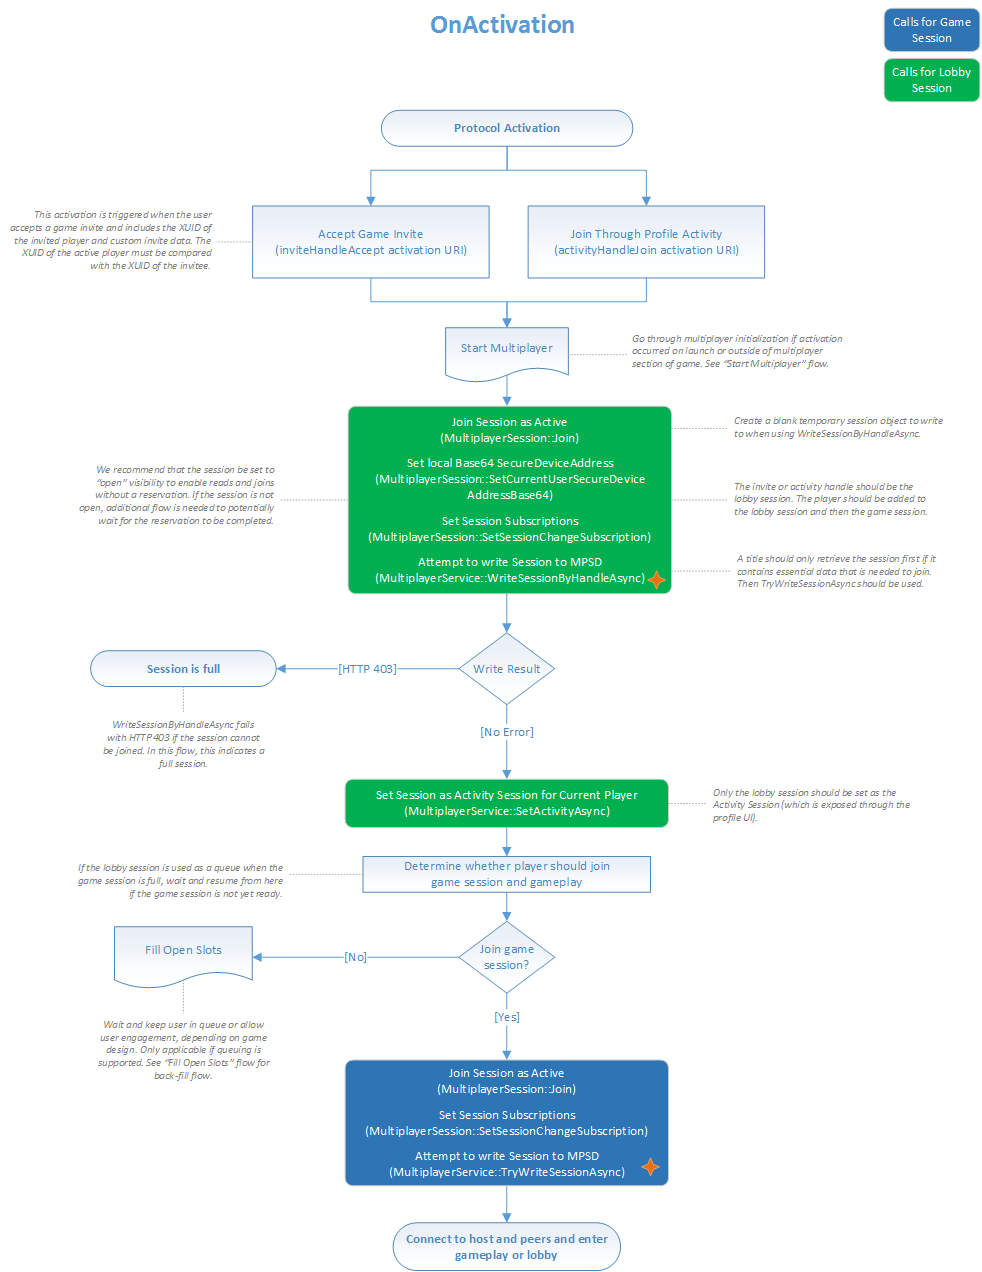 Image of a flow chart that shows how to handle title activation.